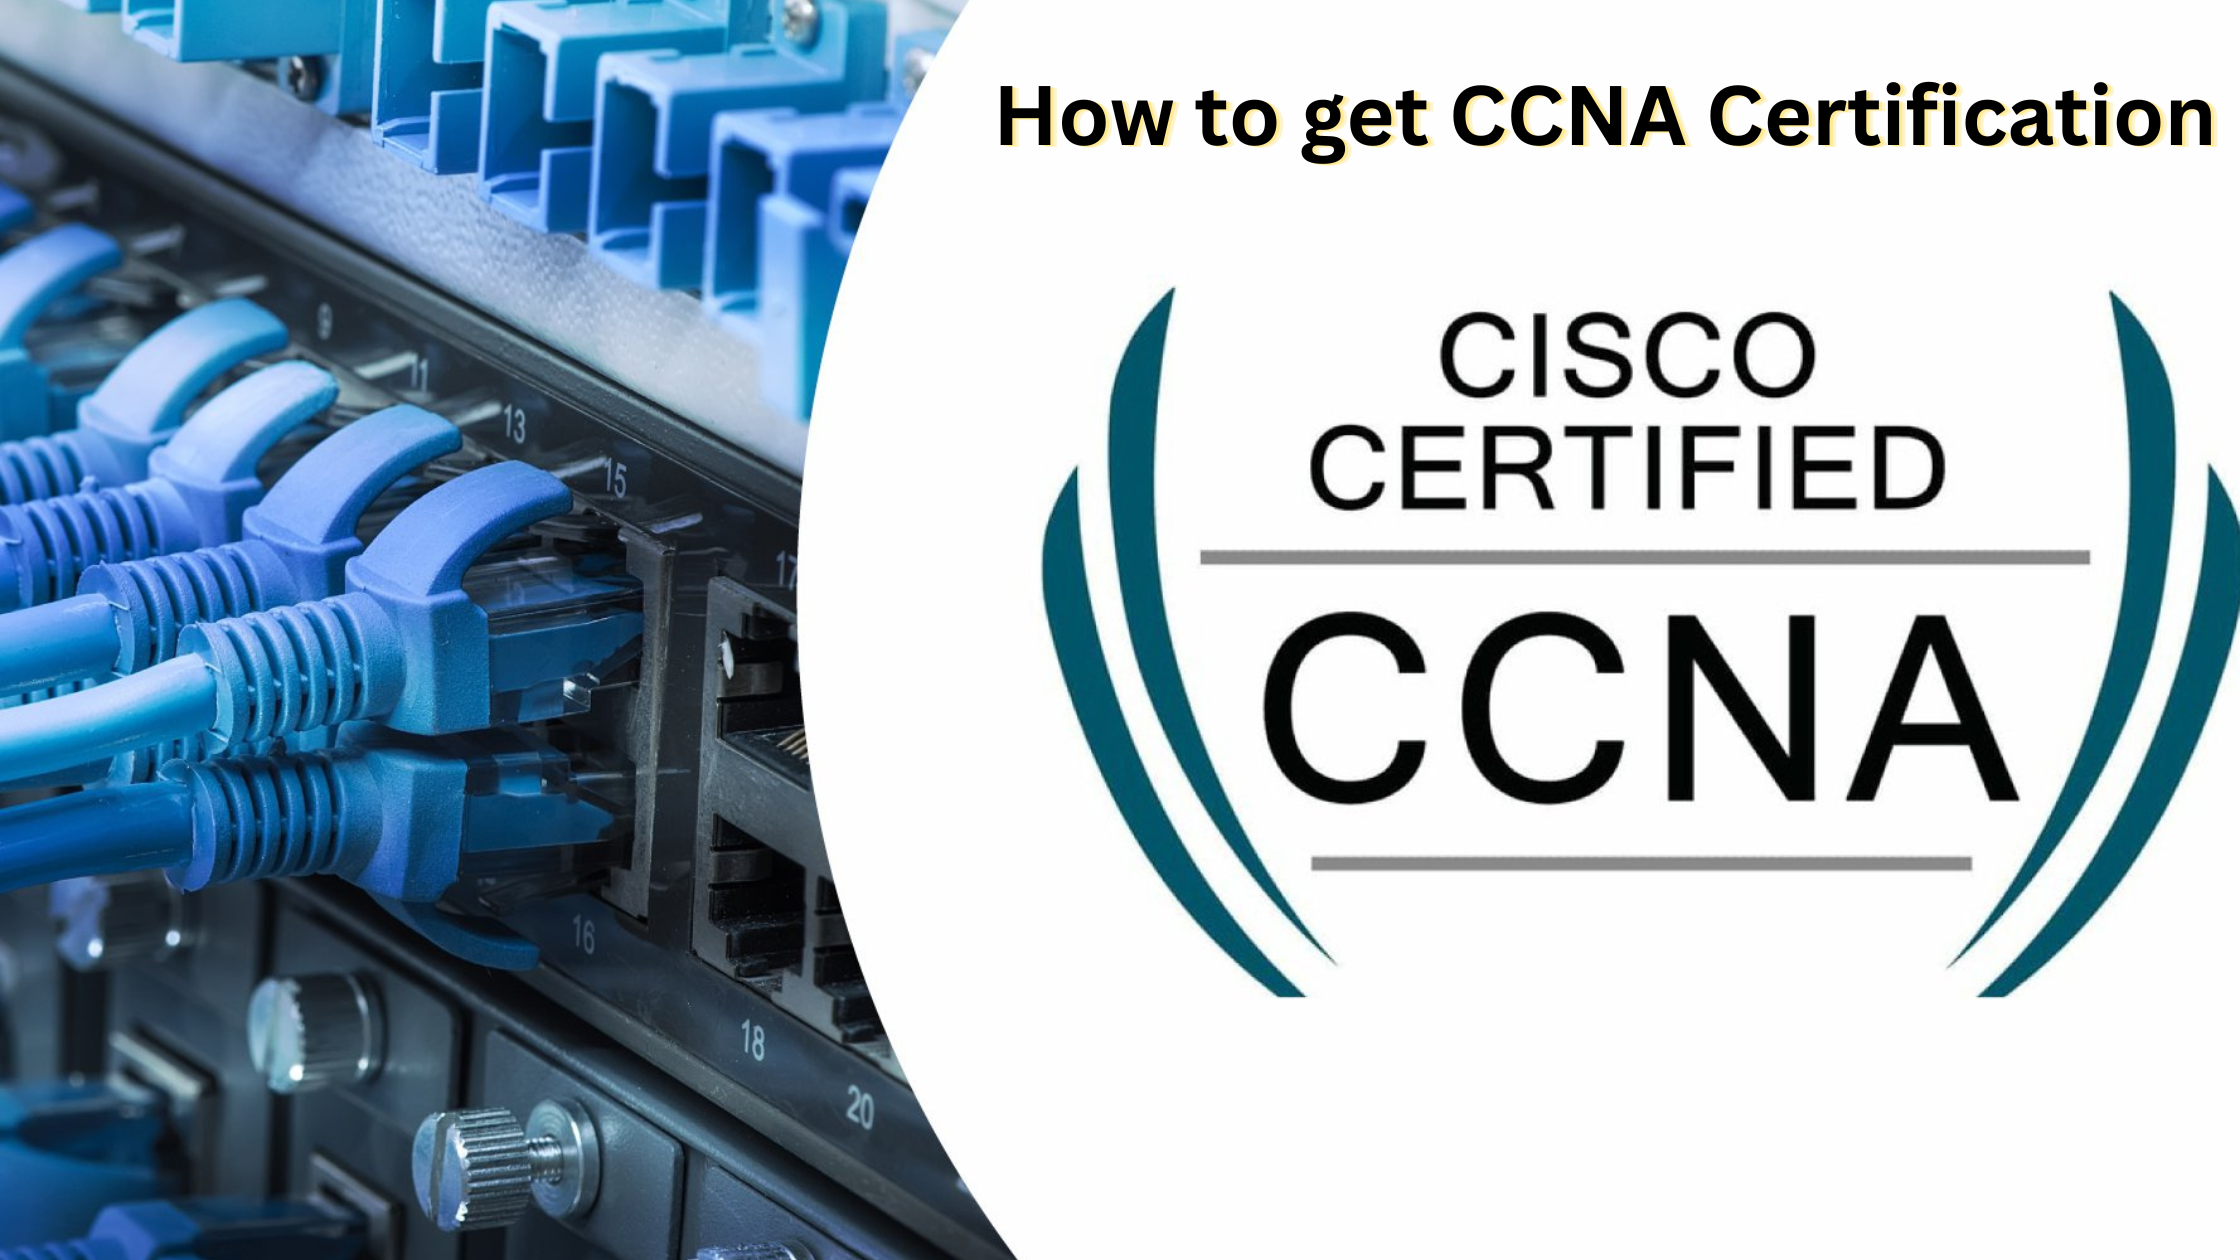 How to get CCNA certification – A complete guide